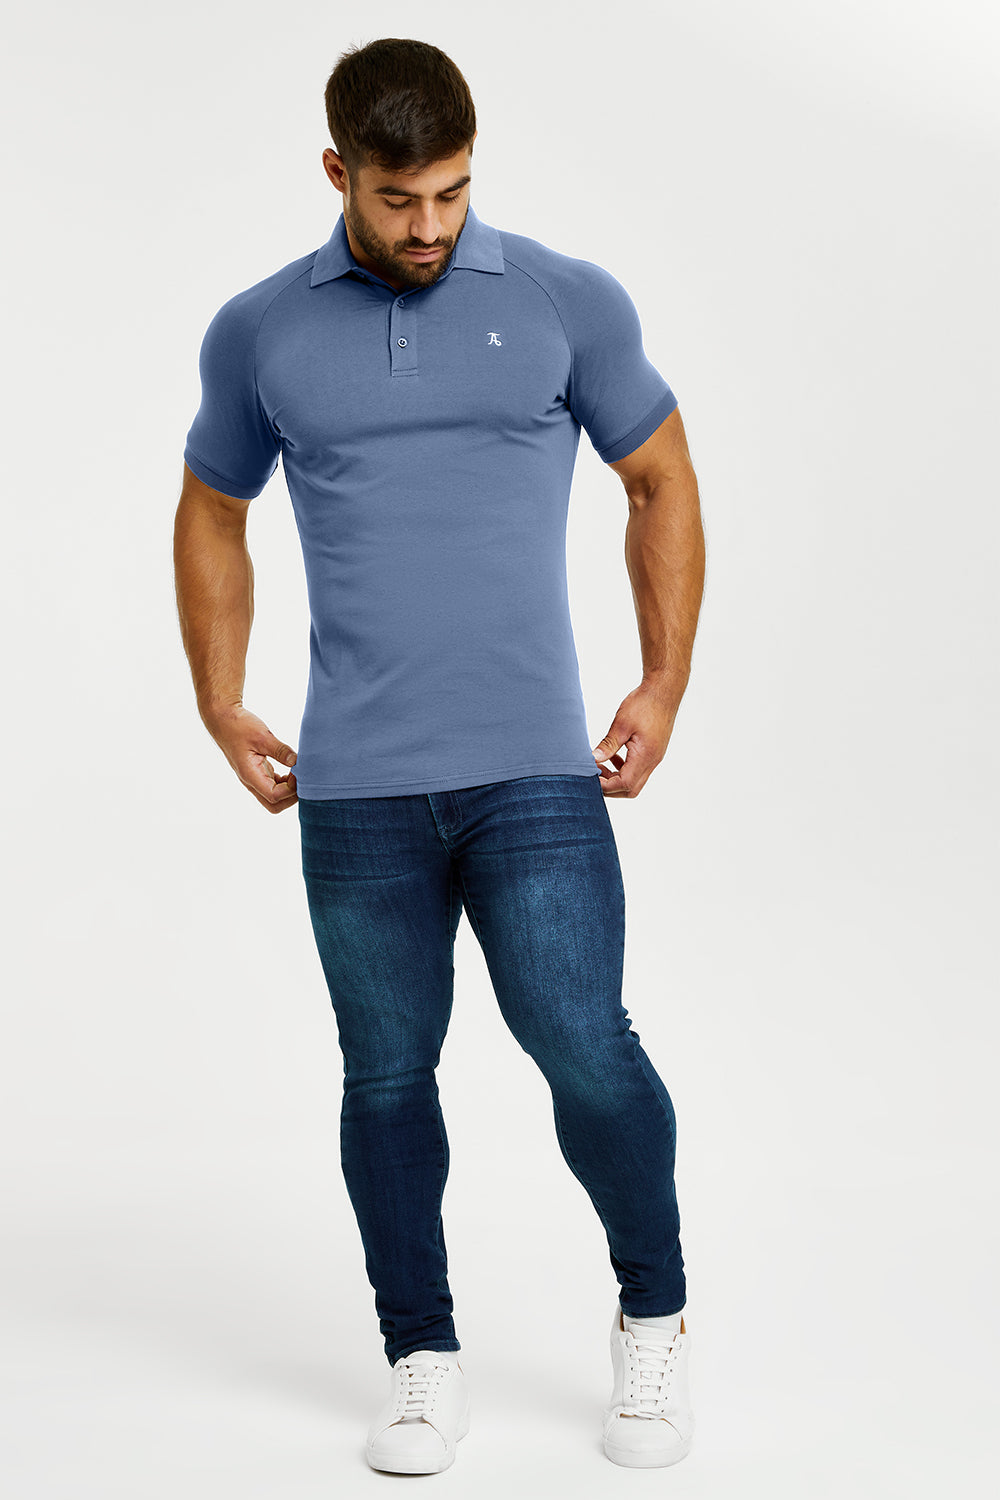 Muscle Fit Polo Shirt in Stone Blue - TAILORED ATHLETE - ROW